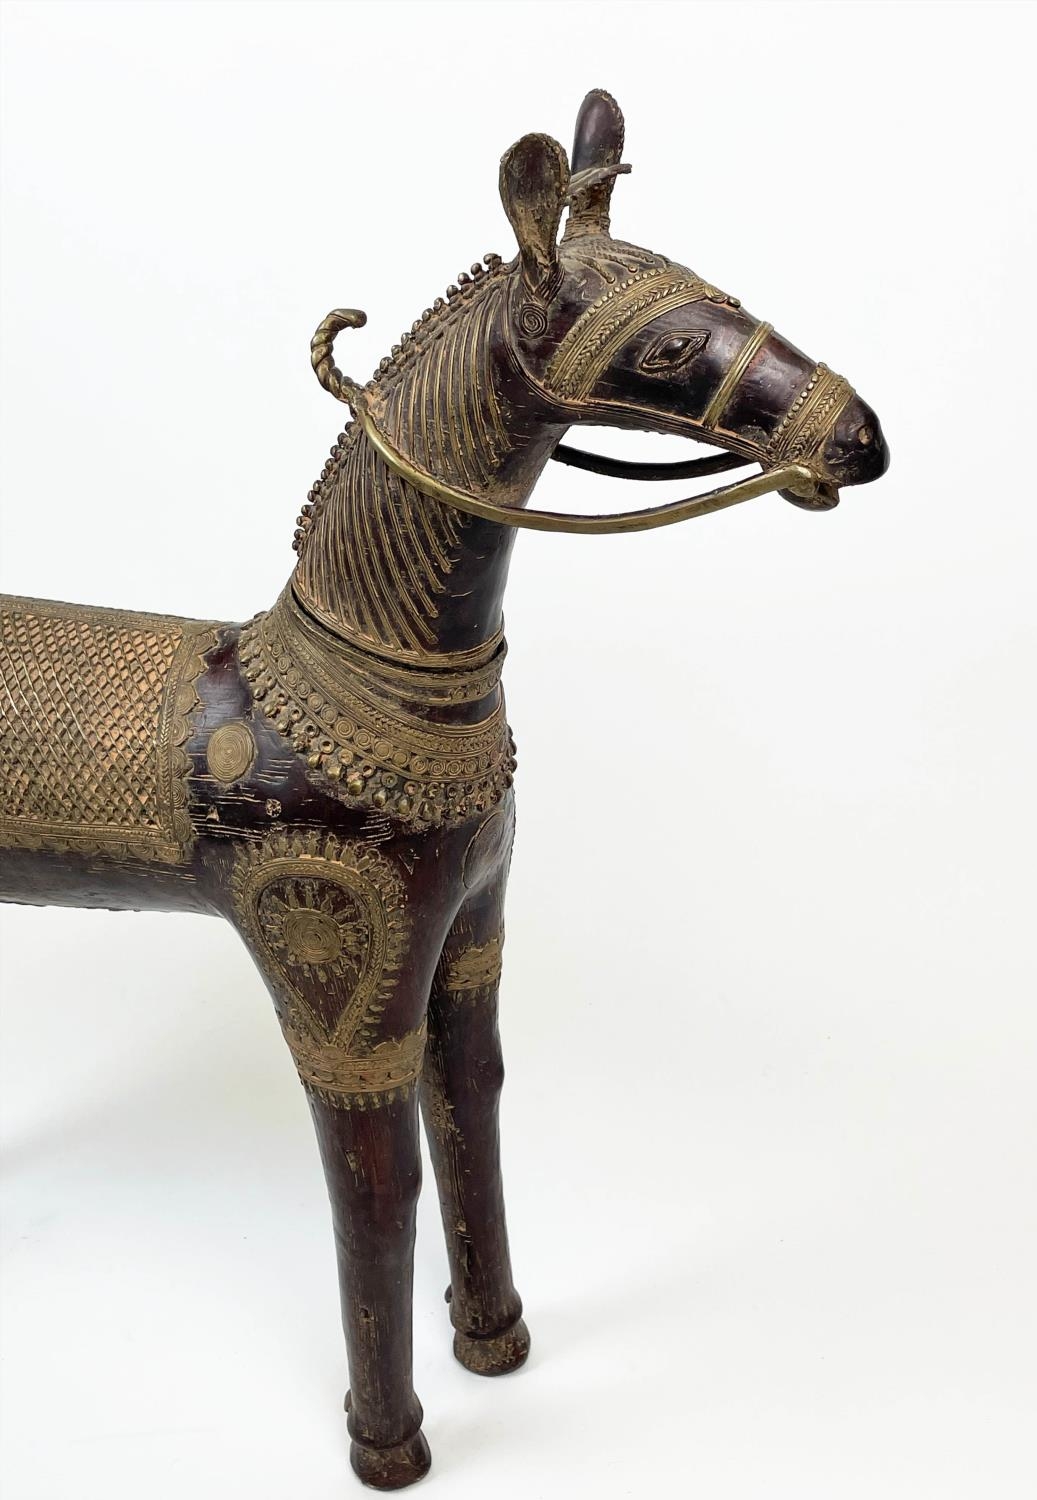 INDIAN BRONZE HORSE, embellished with saddle and decorative detail, 90cm L x 74cm H. - Image 4 of 5